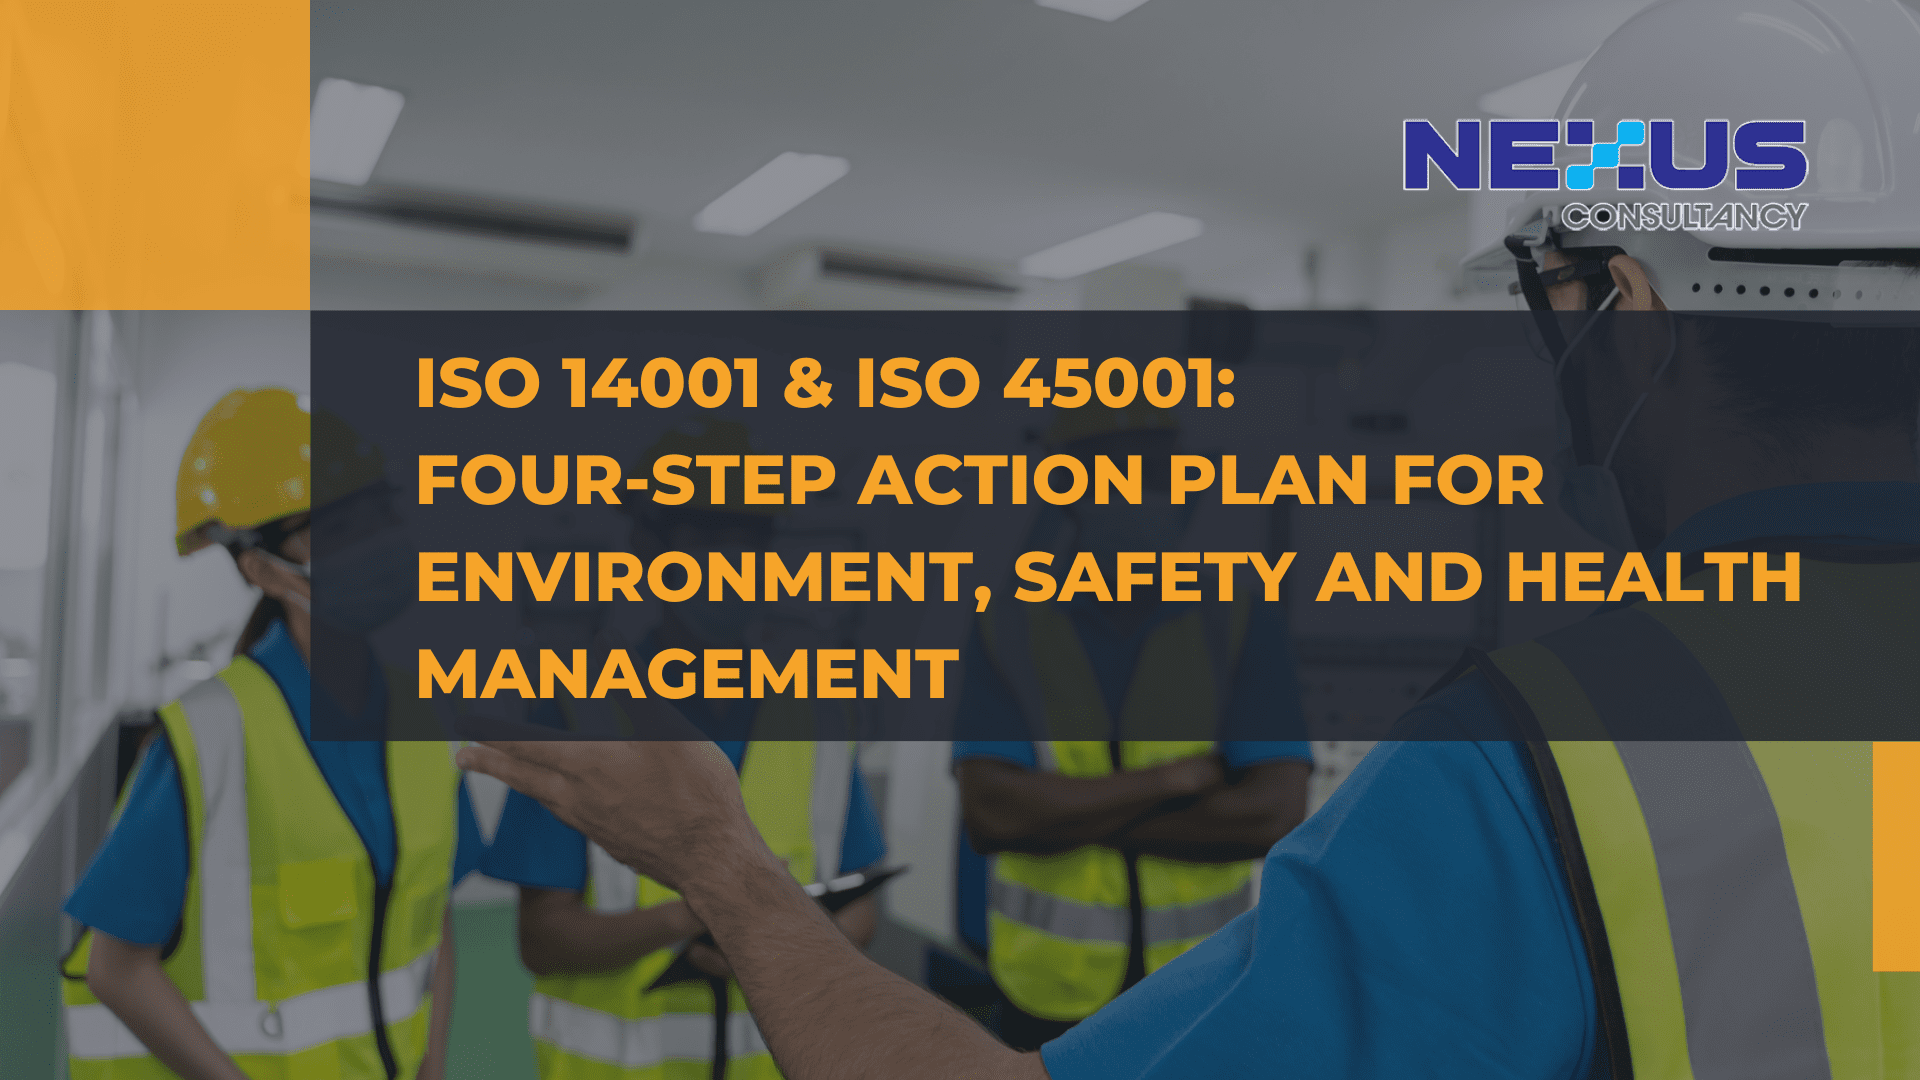 ISO 14001 and ISO 45001 Four-Step Action Plan for Environment, Safety and Health Management (1)